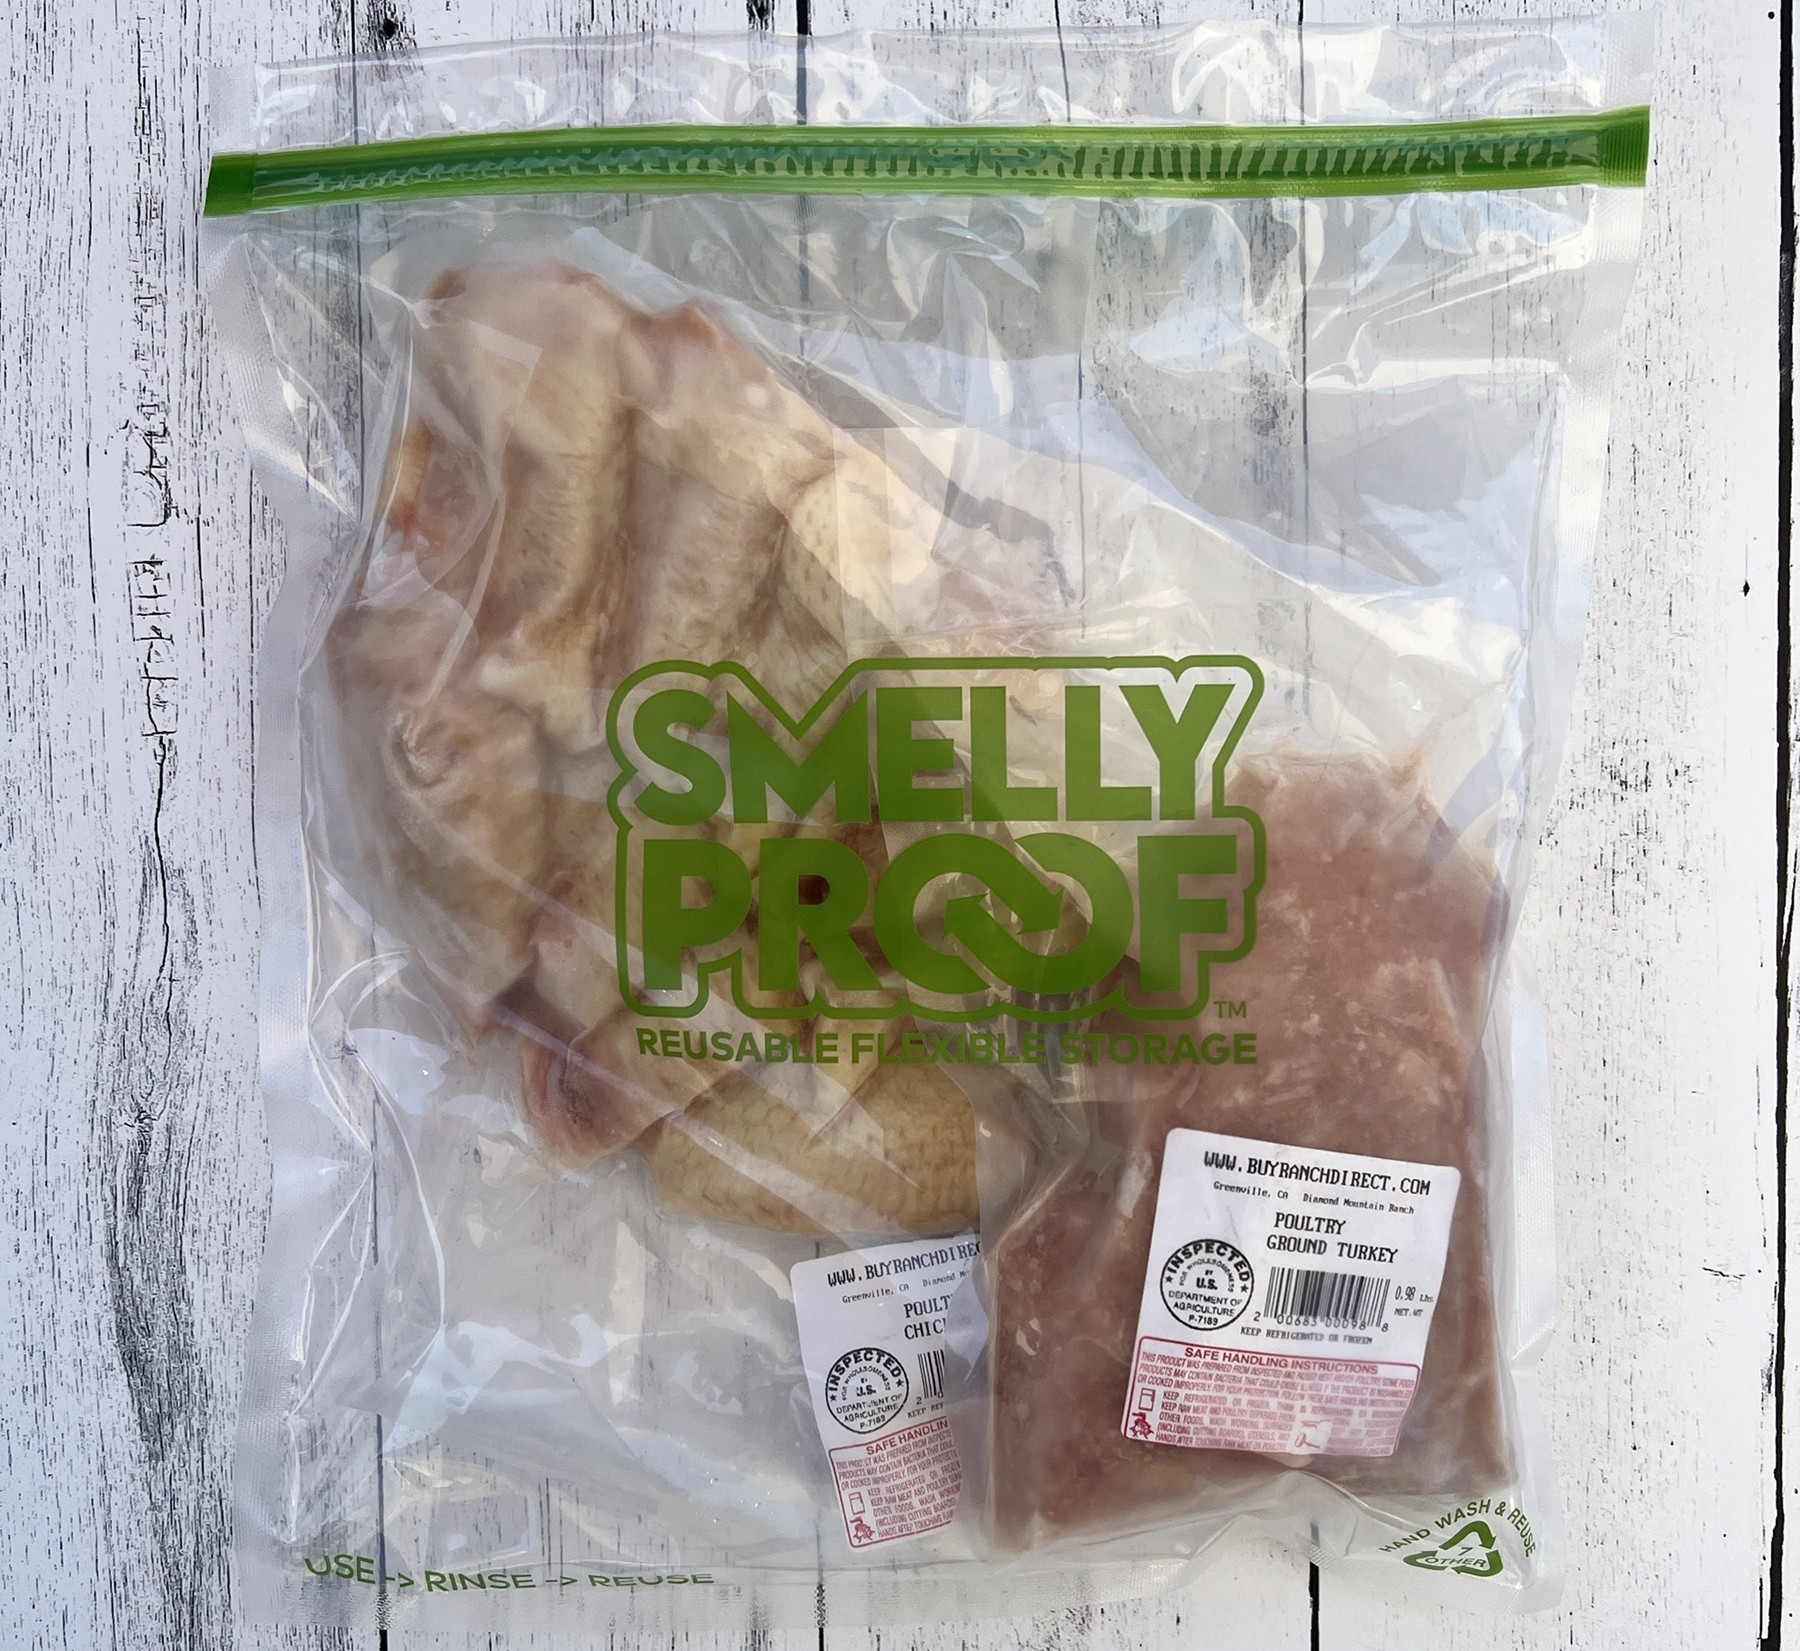 Smelly Proof Reusable Bags: A Pantry Must-Have